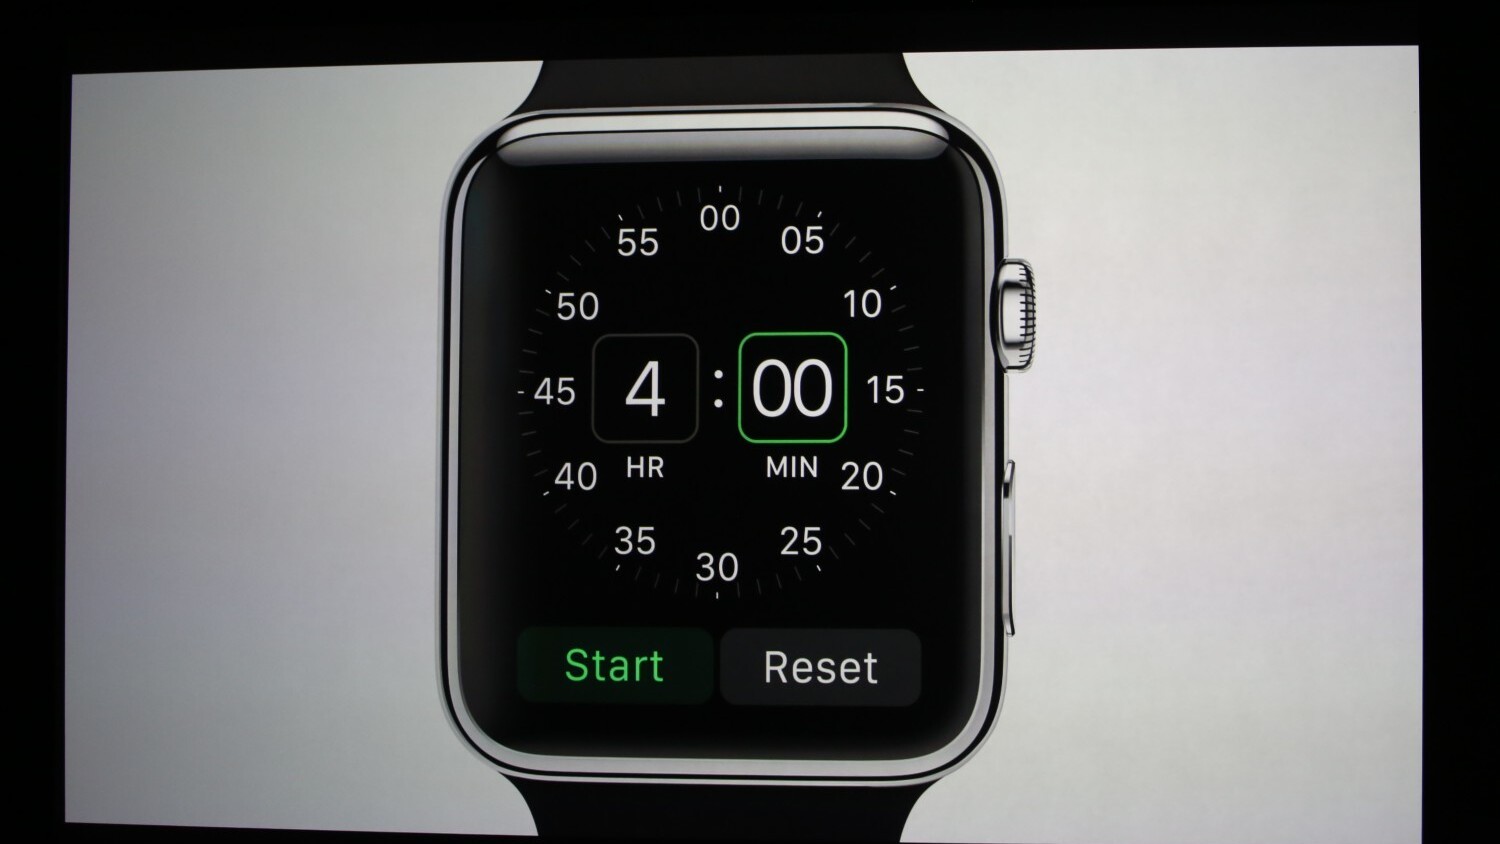 The Apple Watch will be available in ‘early 2015’ for $349